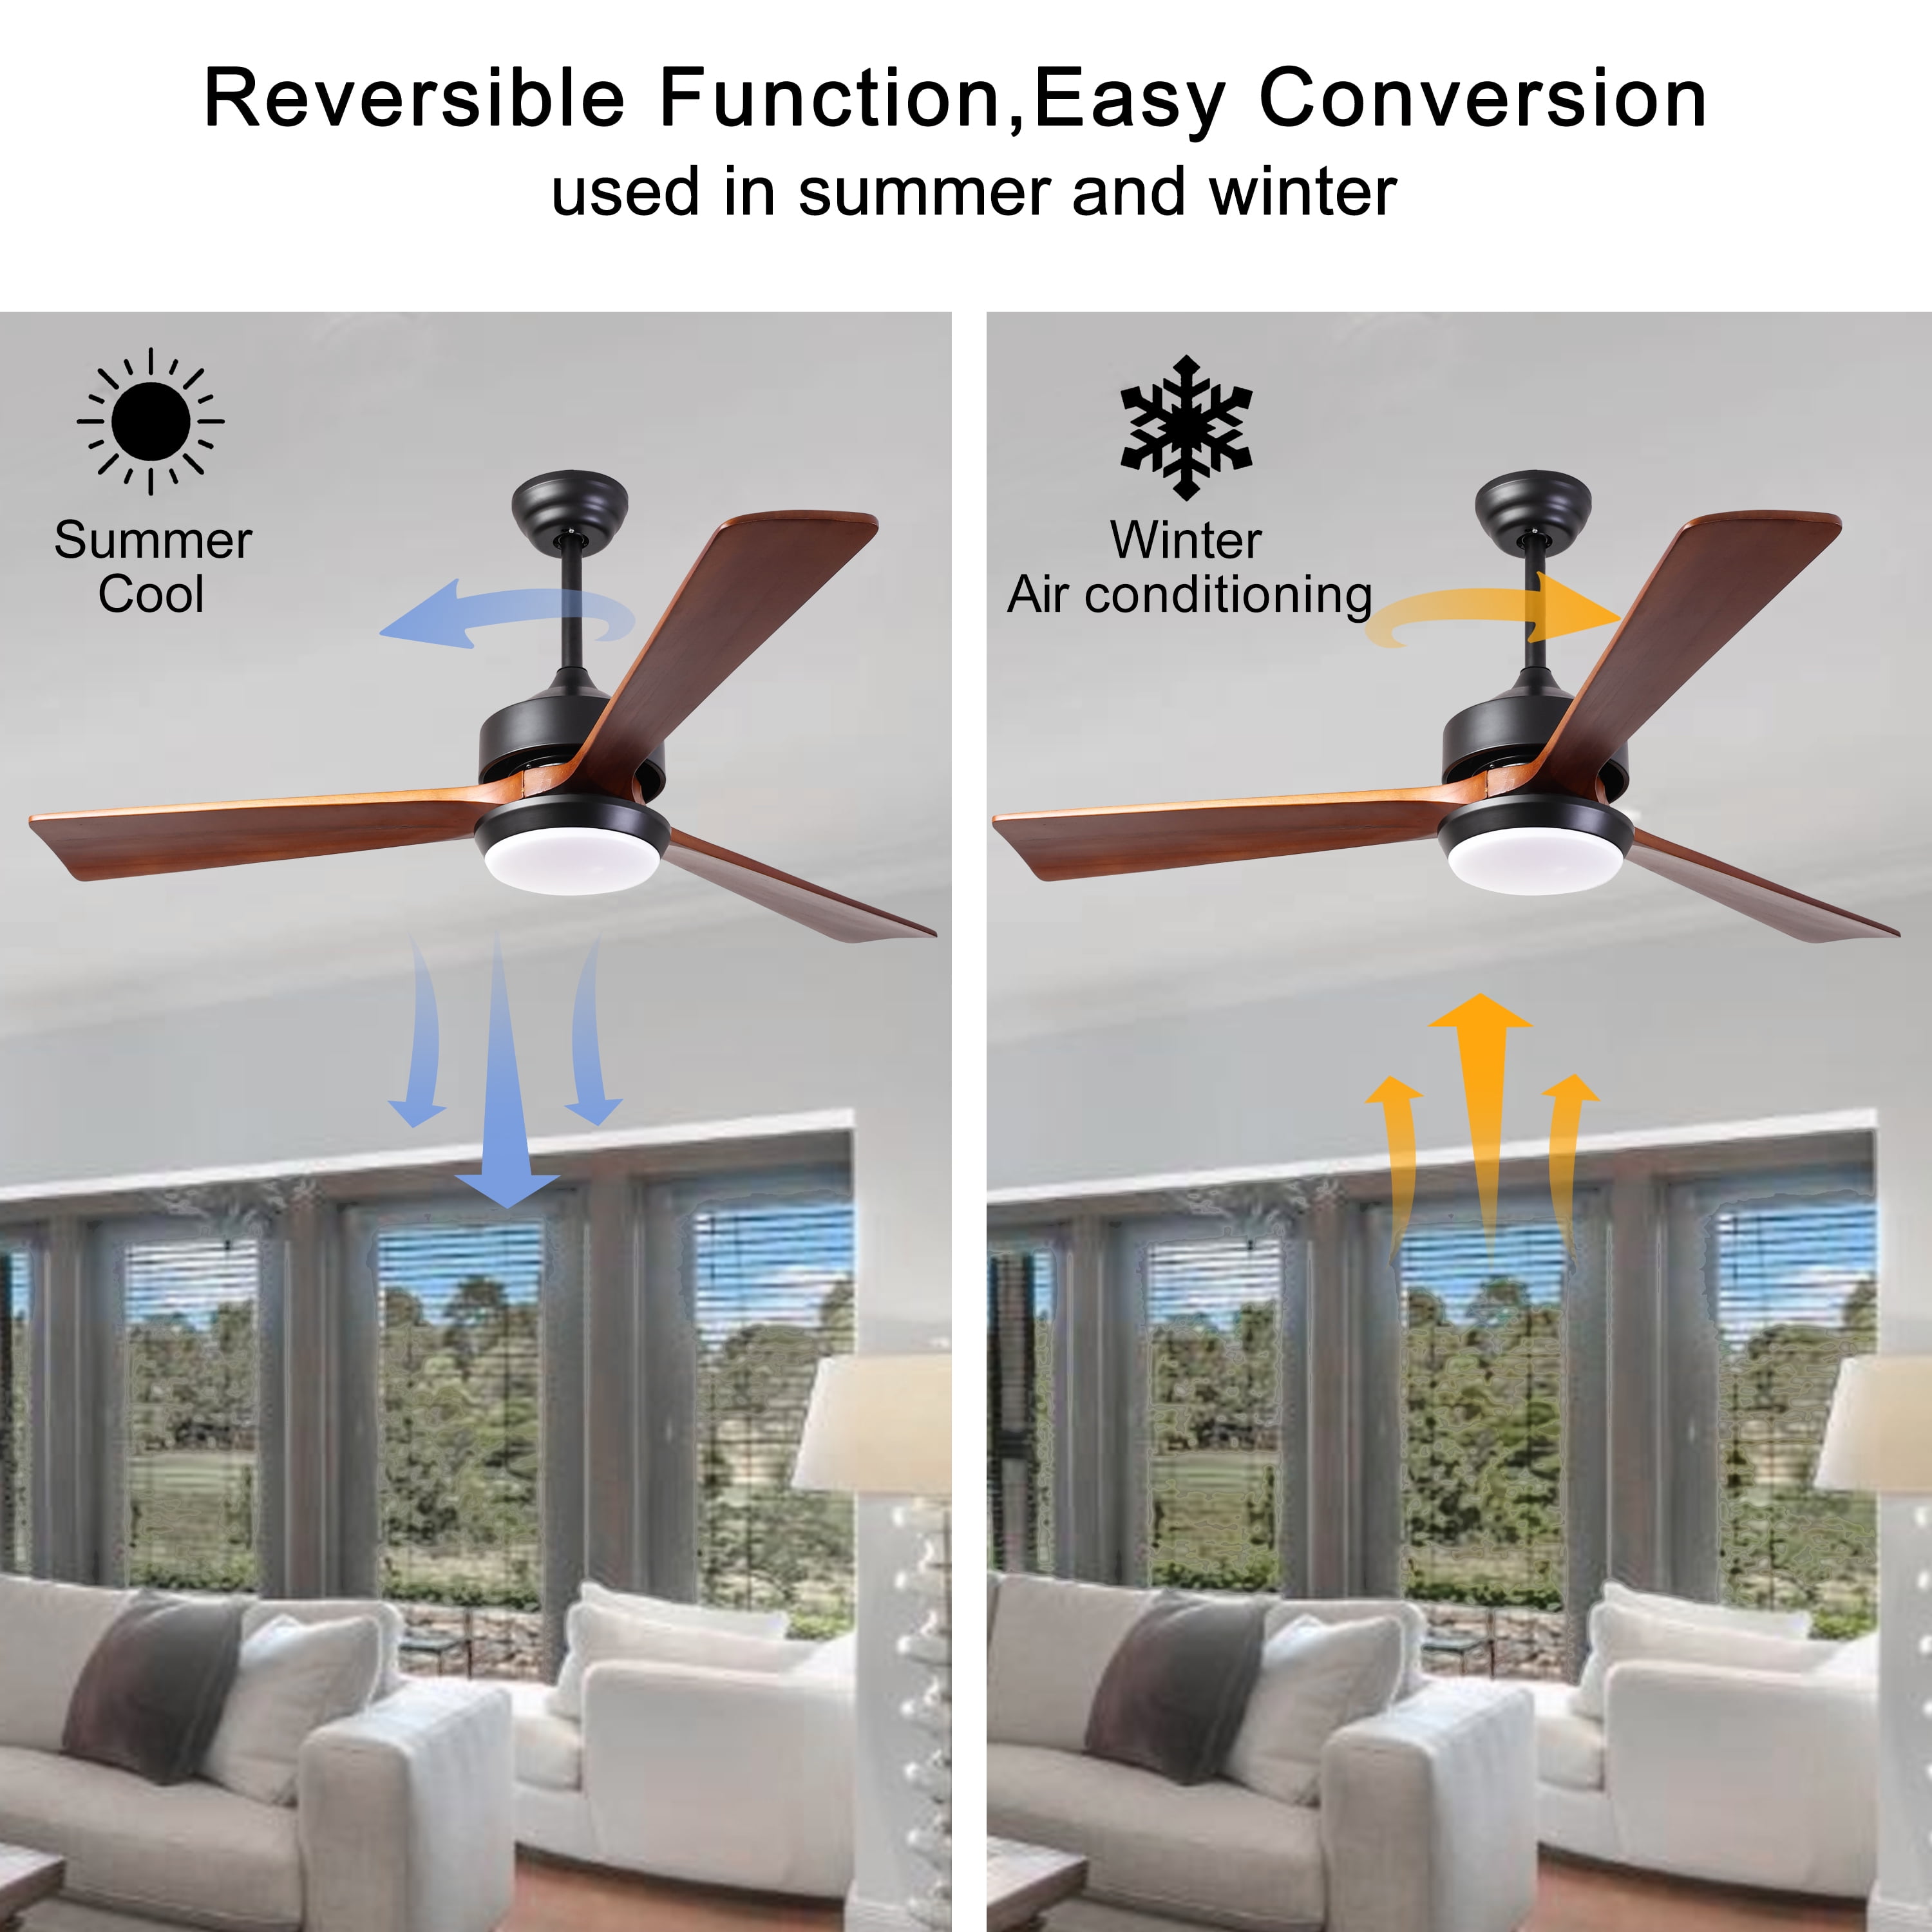 52 Inch Wooden Ceiling Fan with 3 Head Lights and Remote – Living and Home